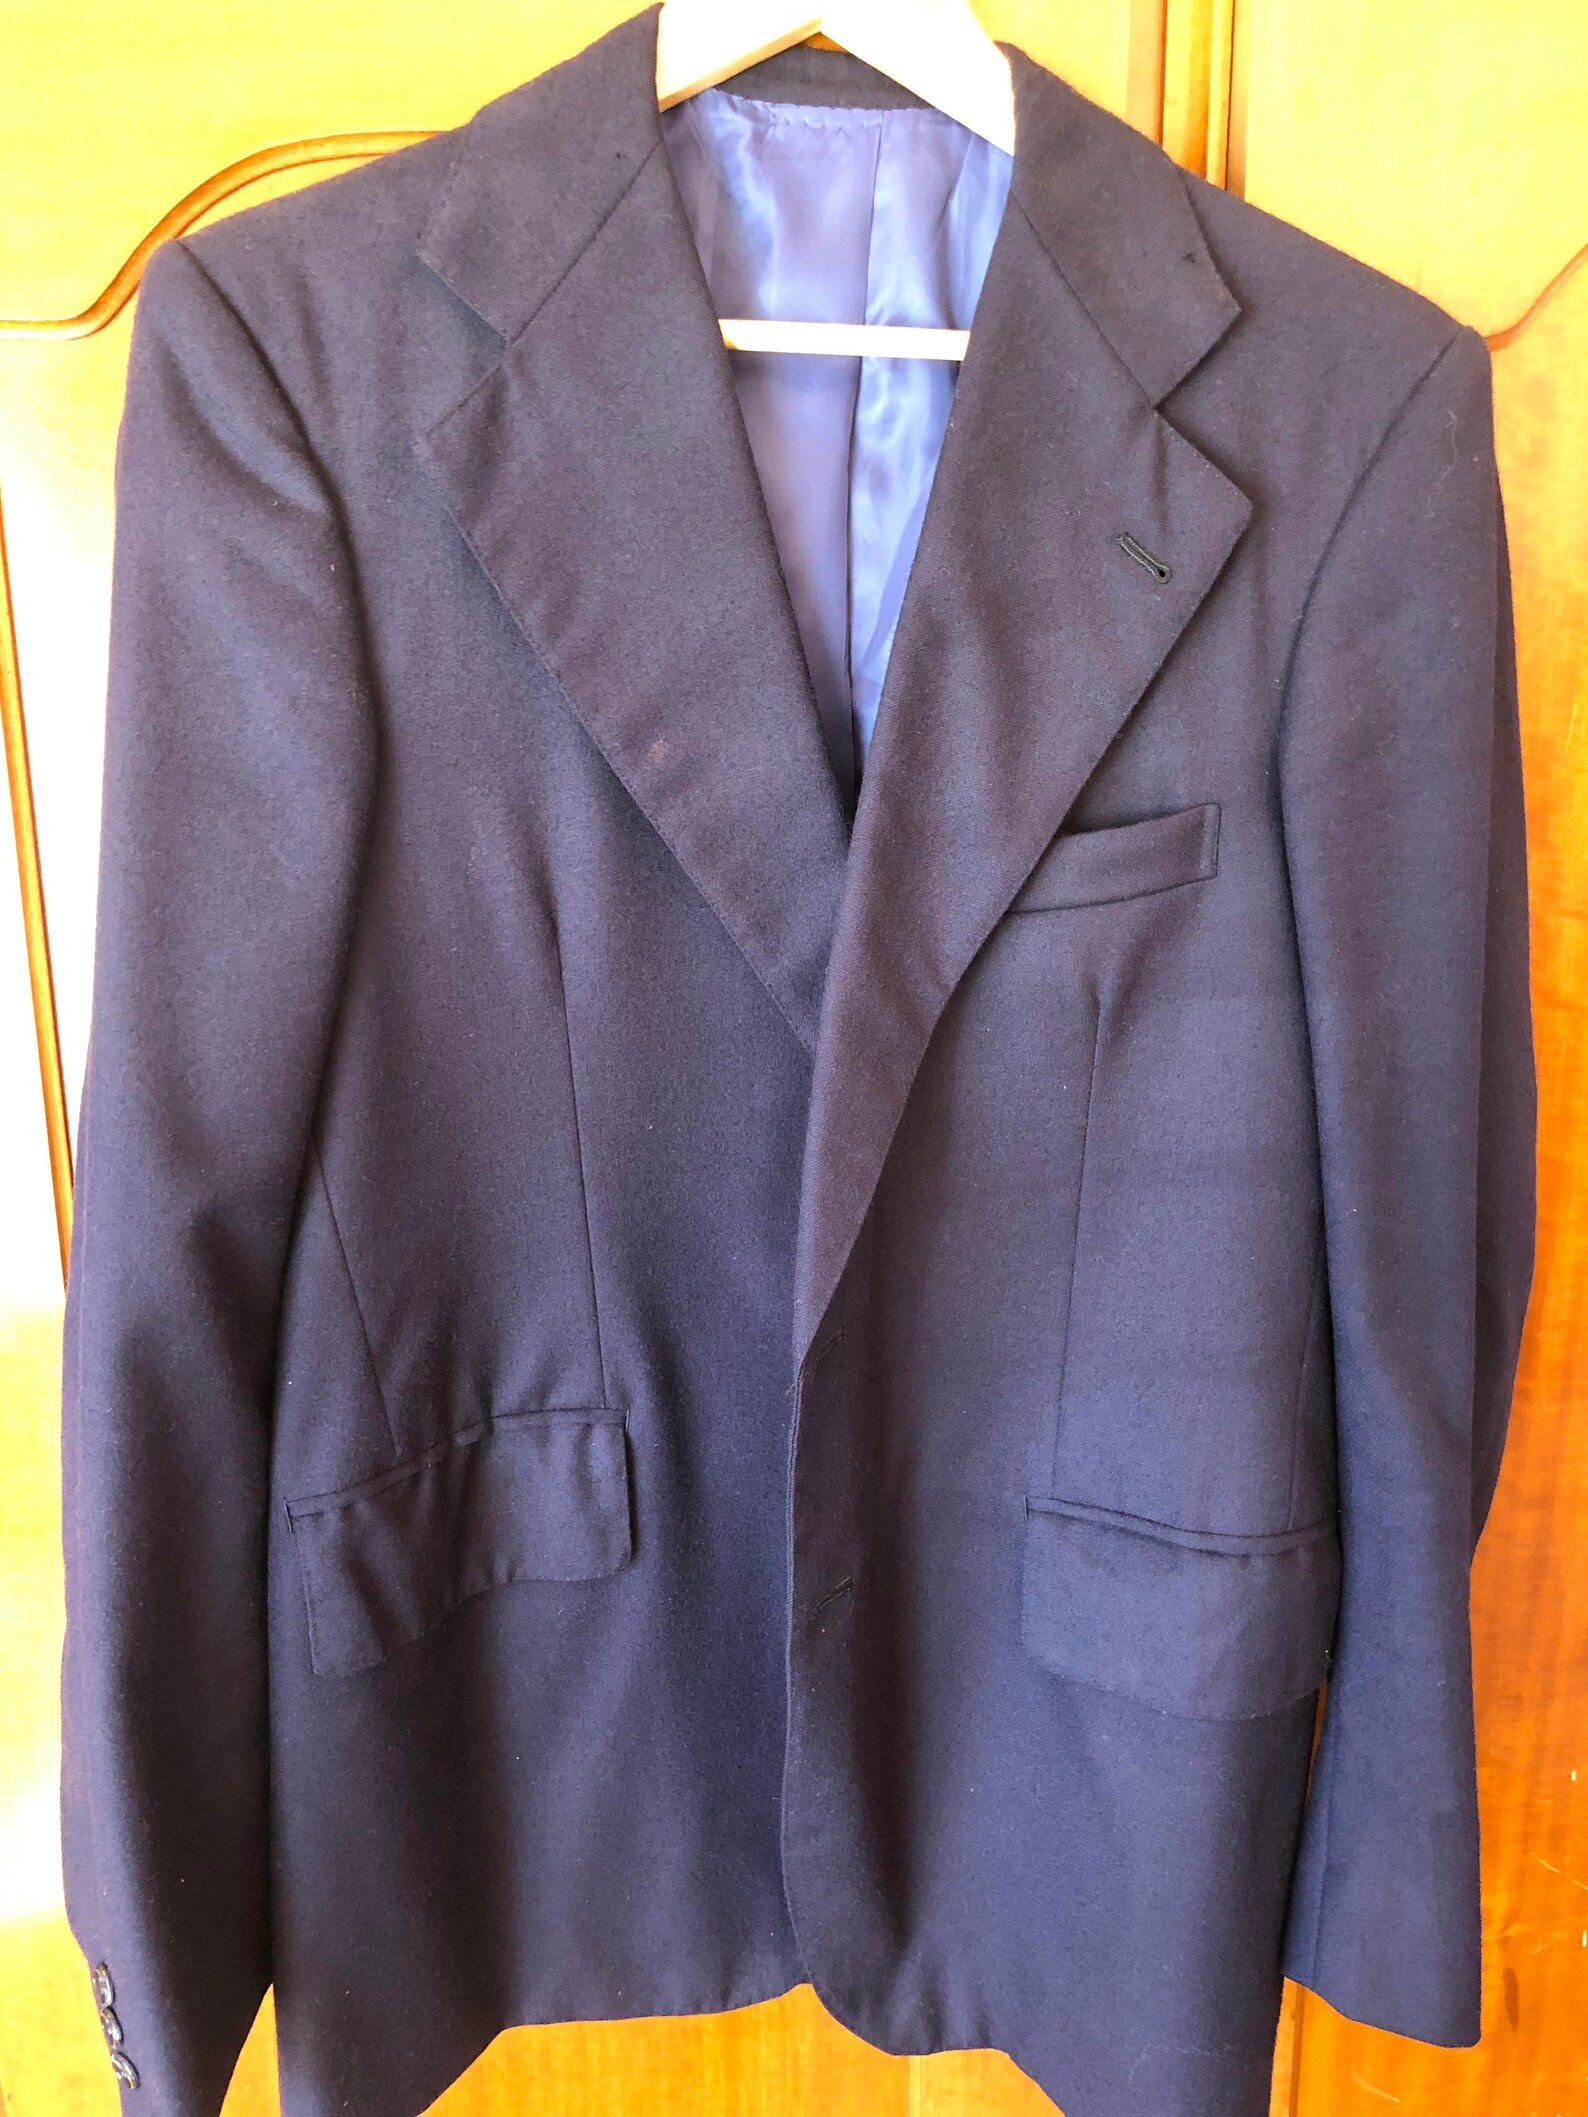 Tailor Made Navy Blue Sports Coat Size 40 | Etsy